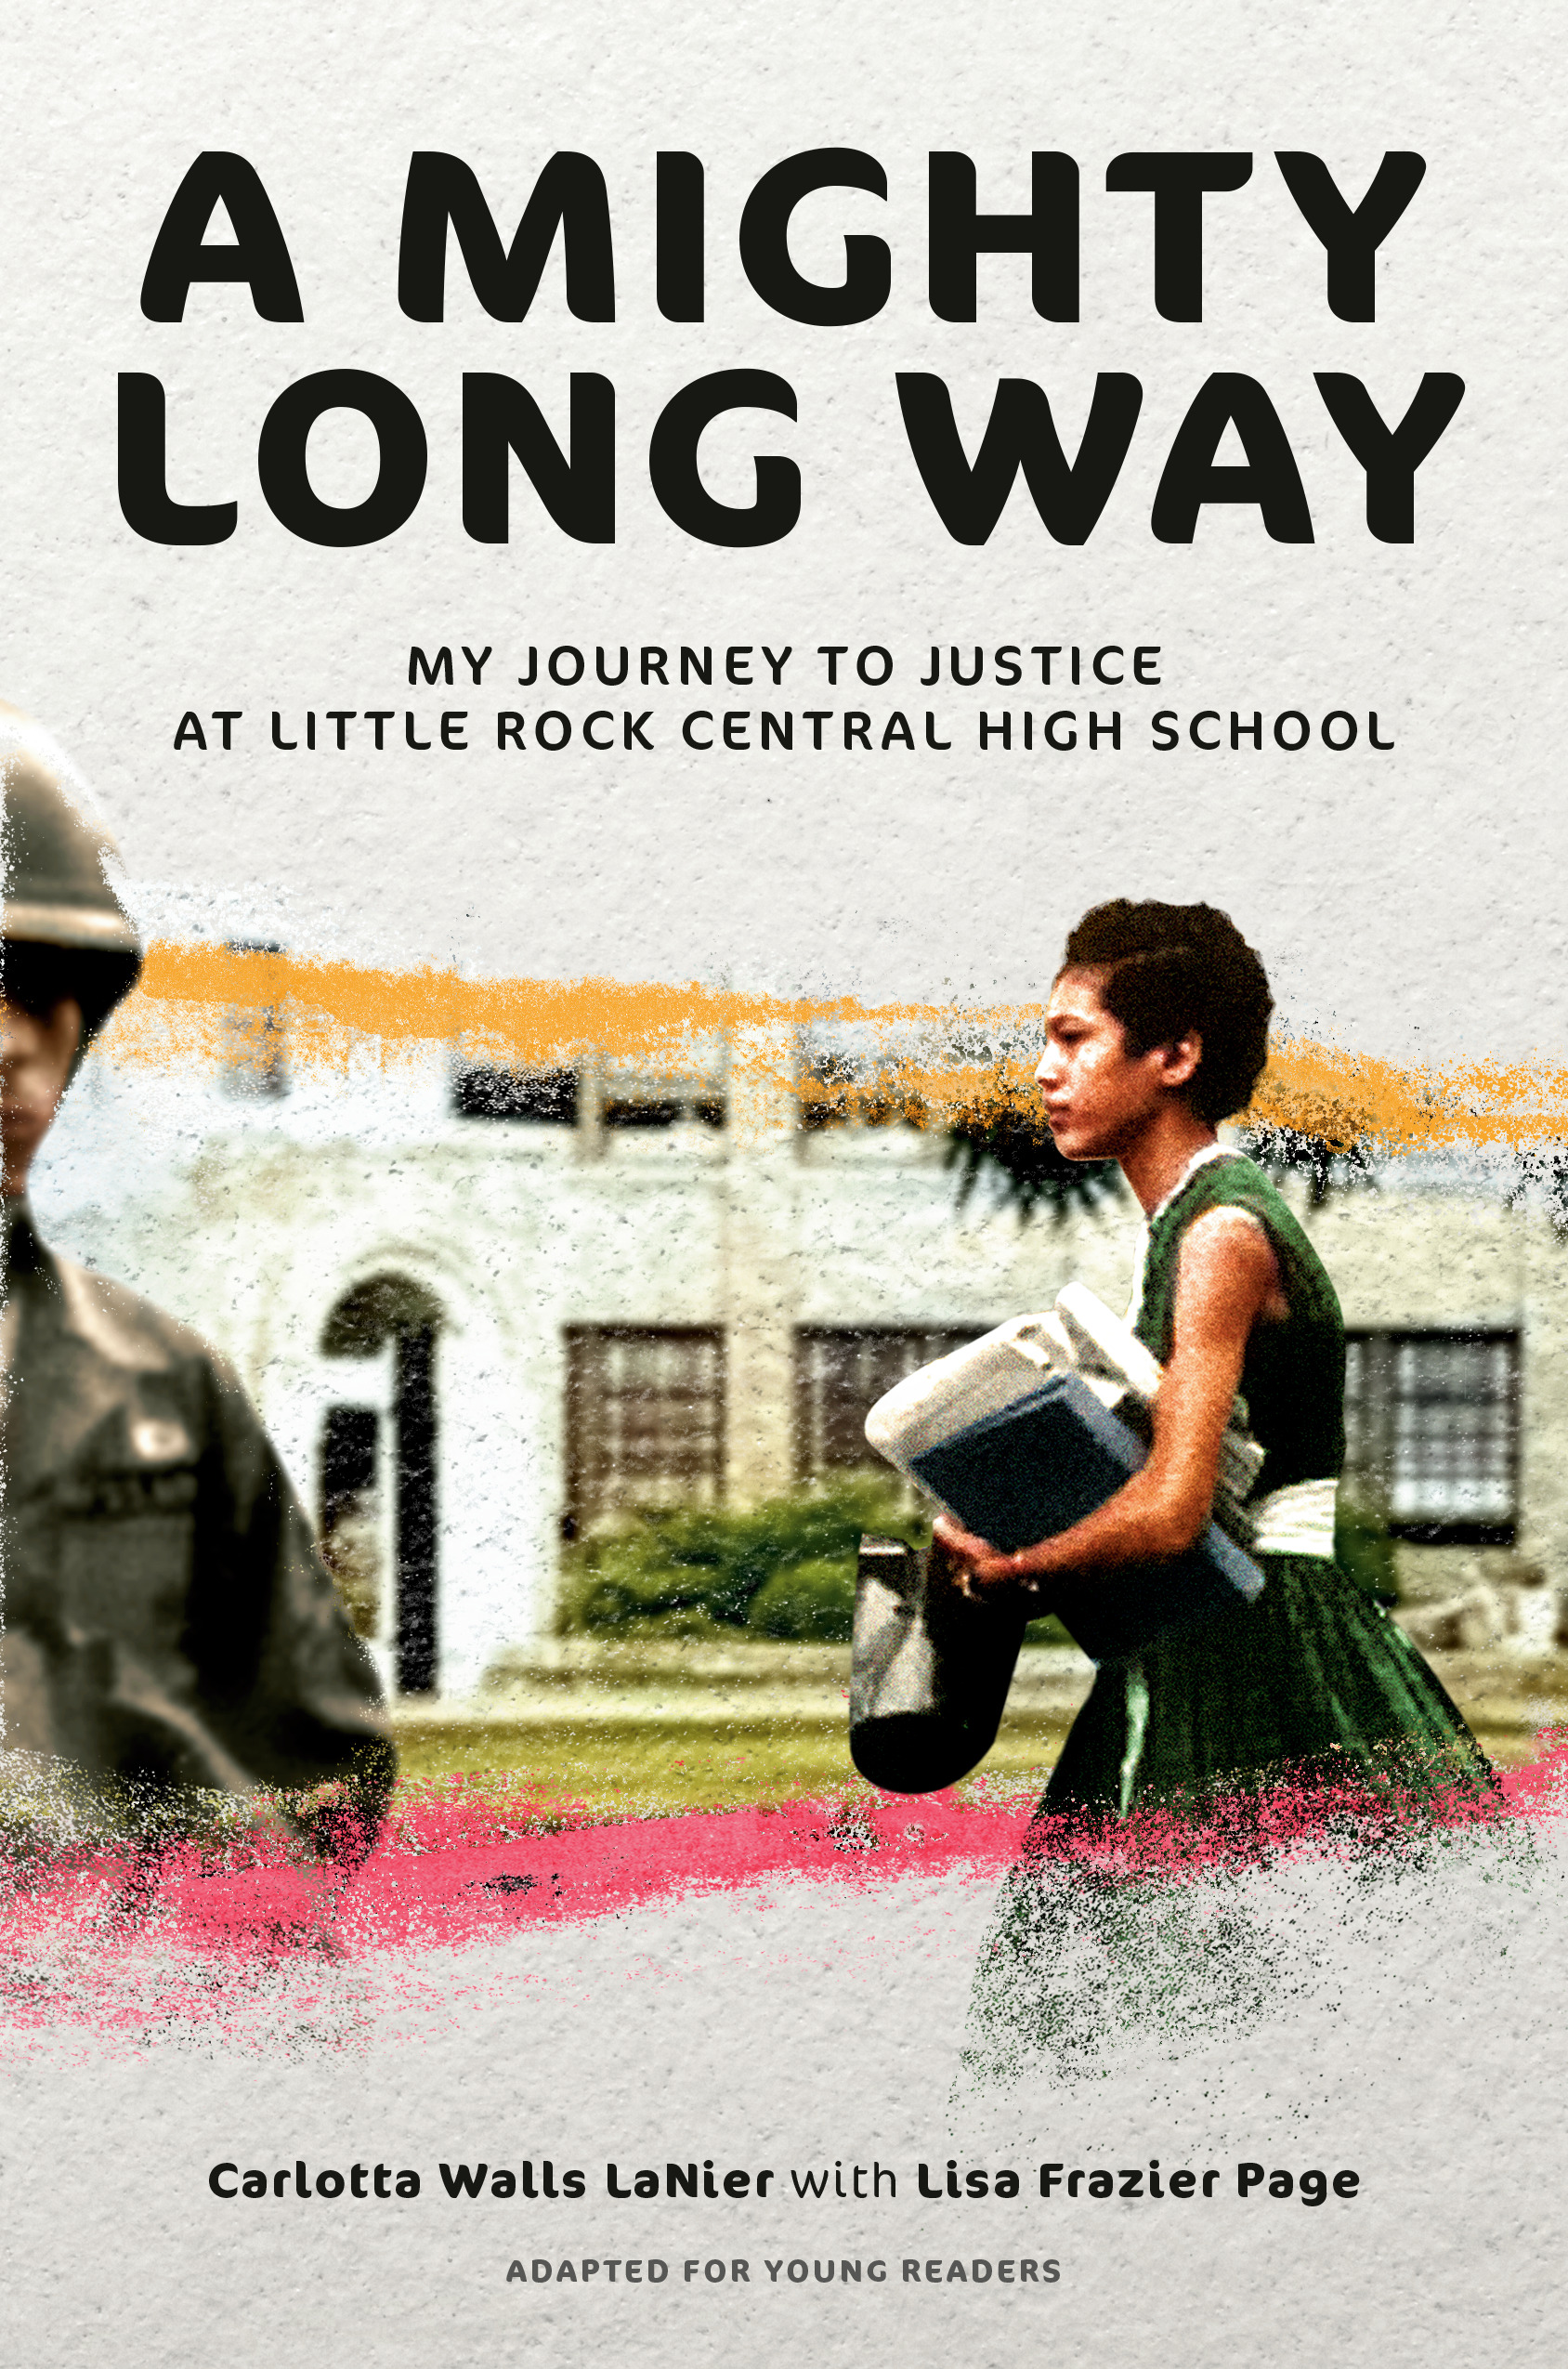 A Mighty Long Way (Adapted for Young Readers) : My Journey to Justice at Little Rock Central High School | Walls LaNier, Carlotta (Auteur) | Frazier Page, Lisa (Auteur)